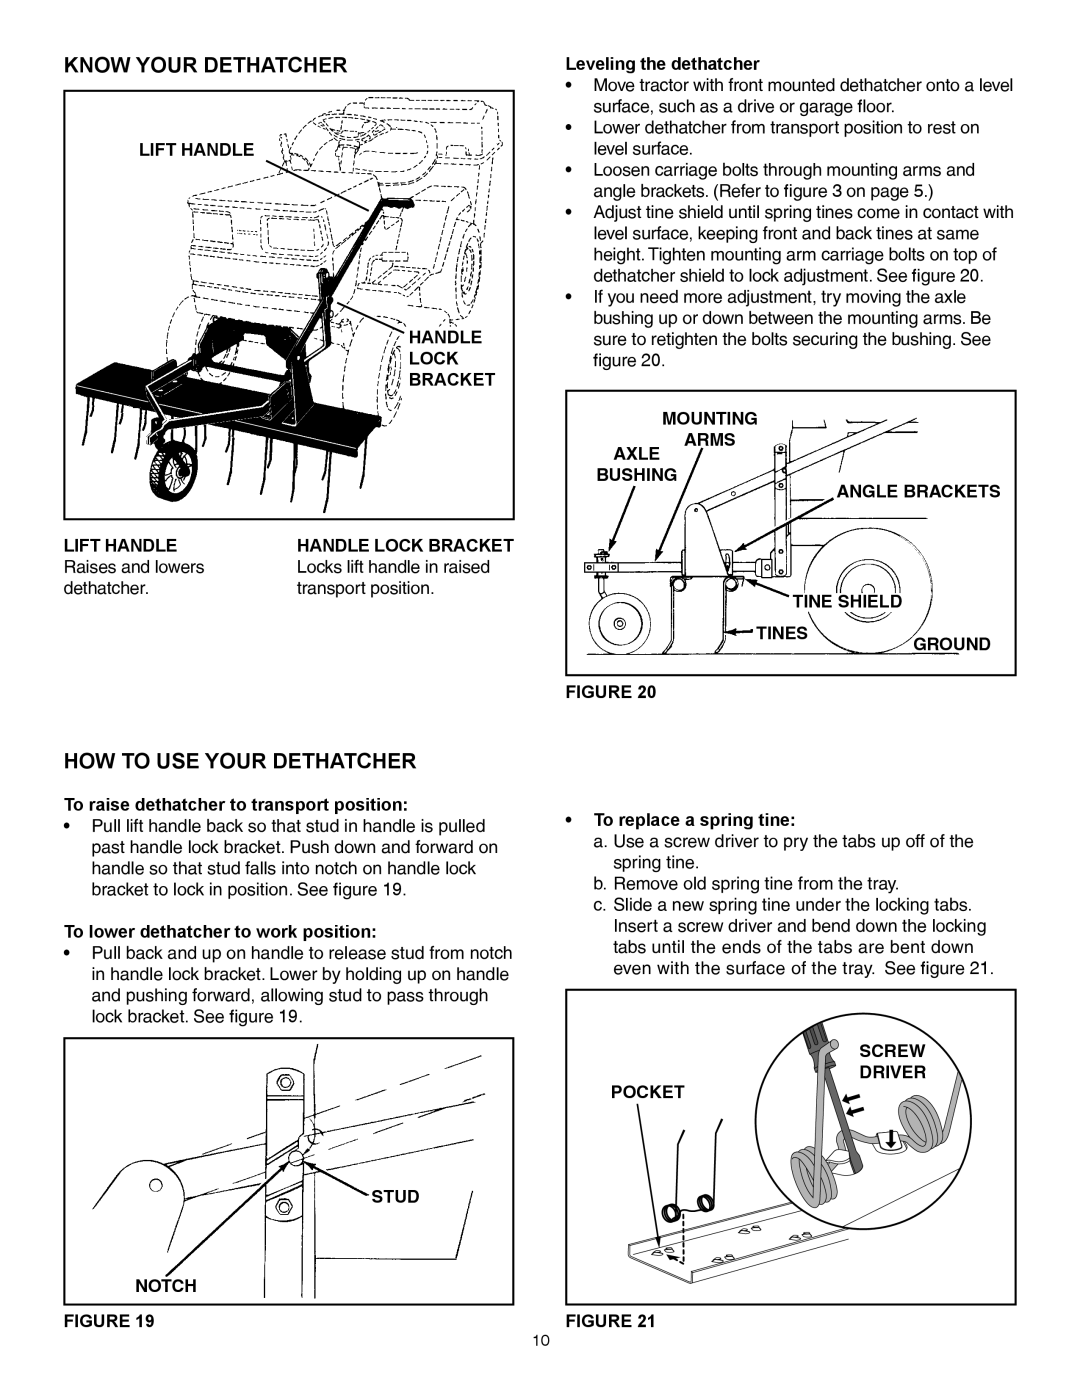 Agri-Fab 45-0438 manual Know Your Dethatcher, How To Use Your Dethatcher, Lift Handle Handle Lock Bracket, Figure 